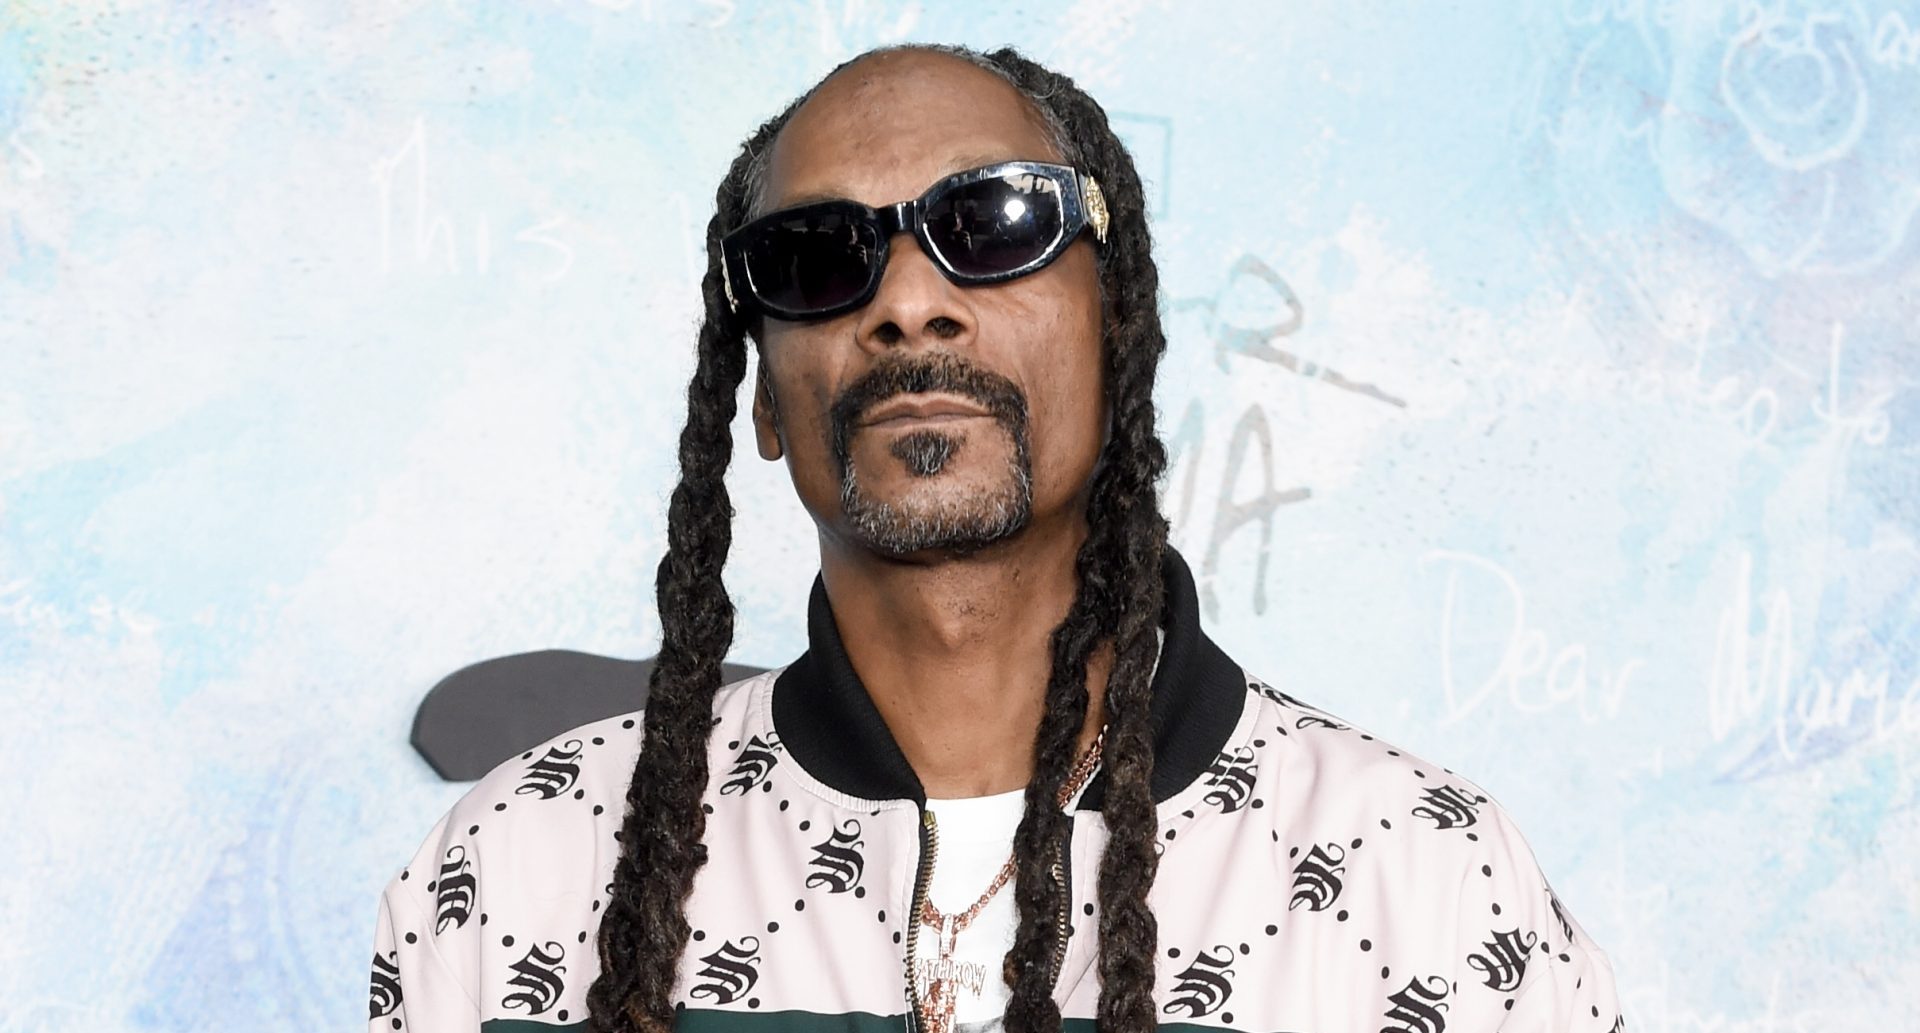 Snoop Dogg Reveals He’s Decided To “Give Up Smoke”